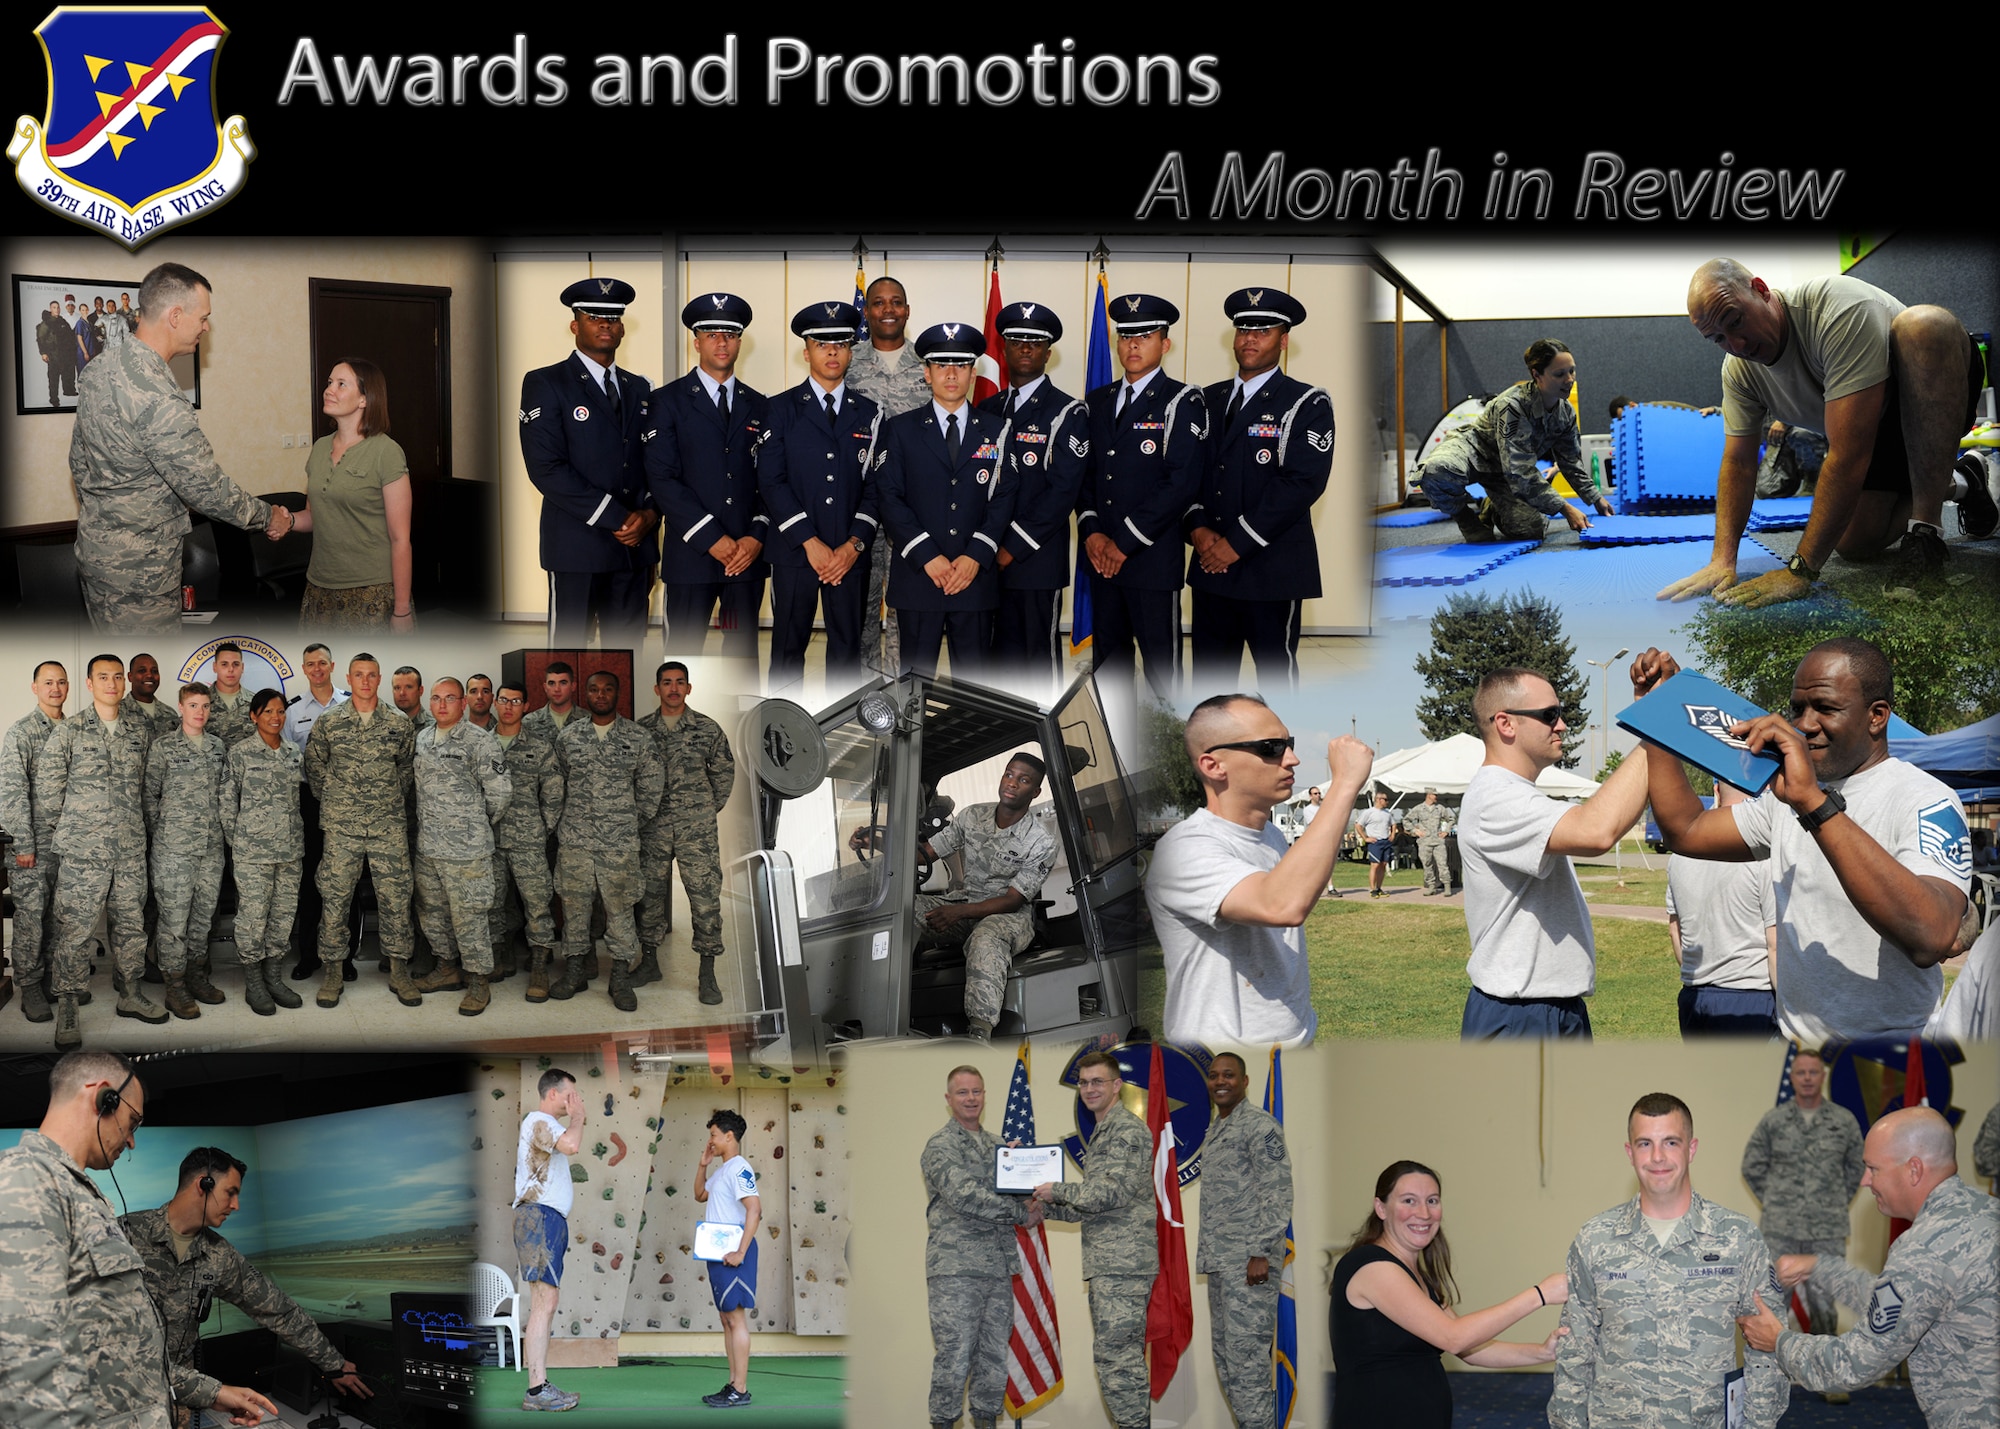 The 39th Air Base Wing has various recognition programs each month recognizing Airman for their hard work.  A few of the programs include: “Pick of the ‘Lik,” quarterly and annual awards, promotion ceremonies, and other awards such at the First Sergeant’s “Diamond Sharp” and the Chief’s group award.  (Illustration by Staff Sgt. Veronica Pierce)